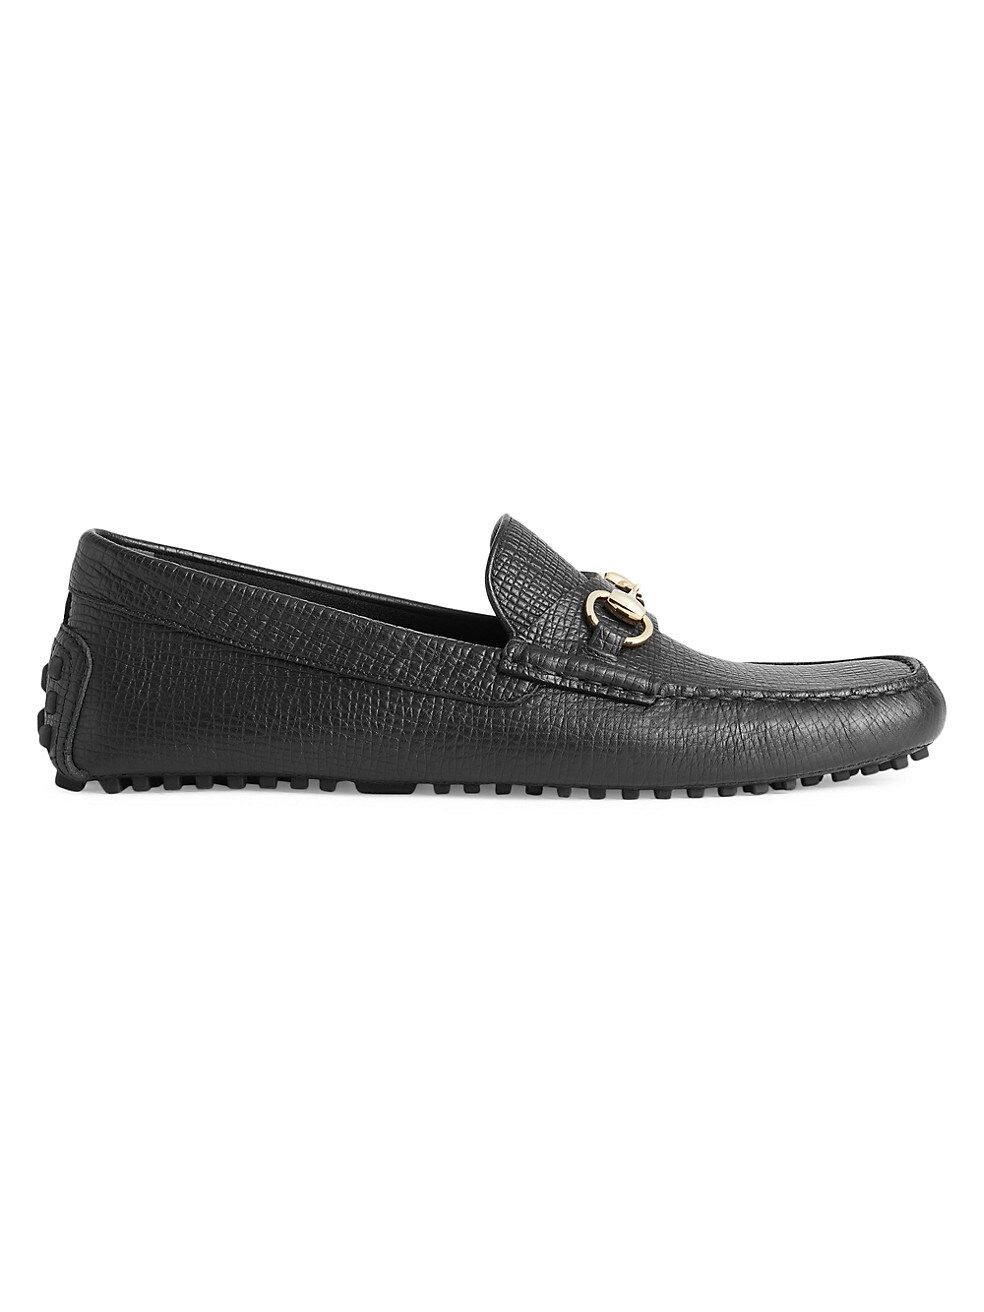 Gucci Ayrton Driver Loafers | Saks Fifth Avenue